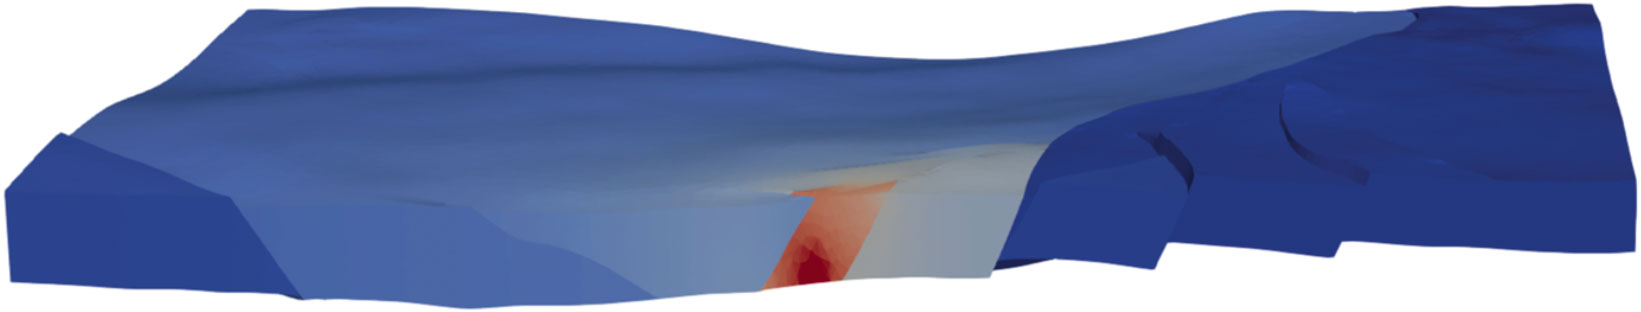 GEOSX computer simulation showing pressure distribution of a Gulf of Mexico reservoir